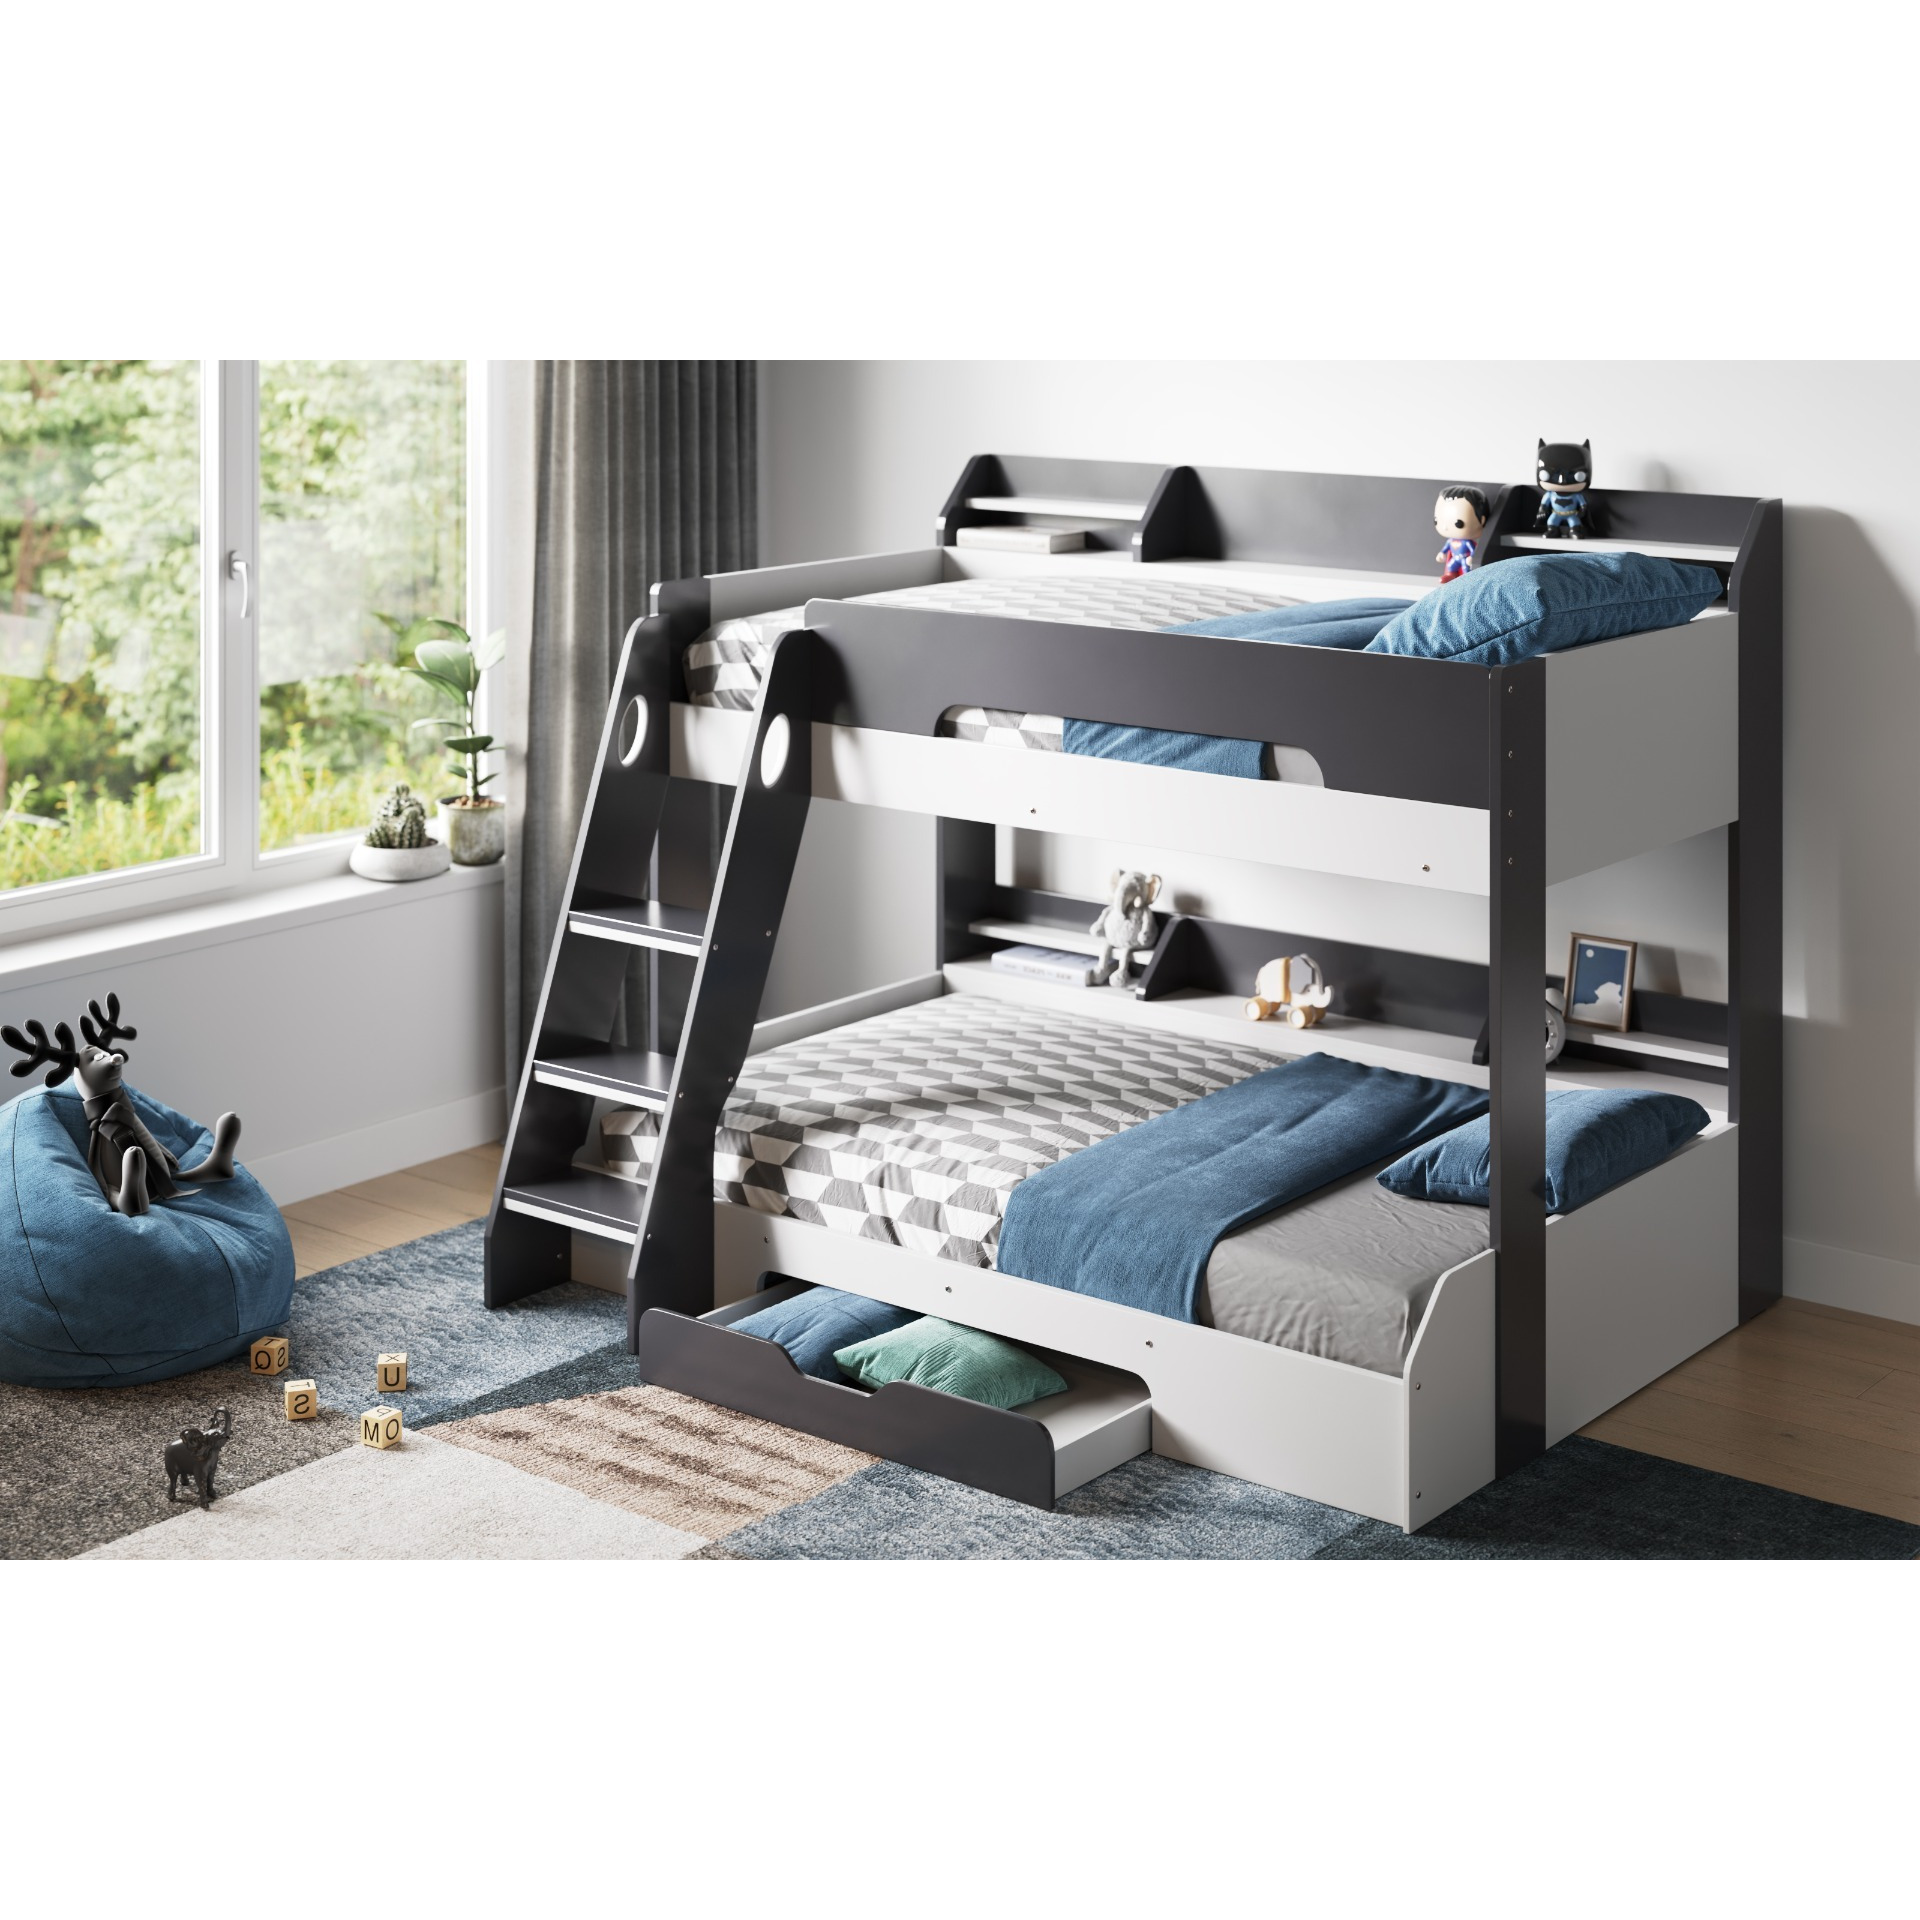 Flair Flick Triple Bunk Bed Grey With Storage - image 1